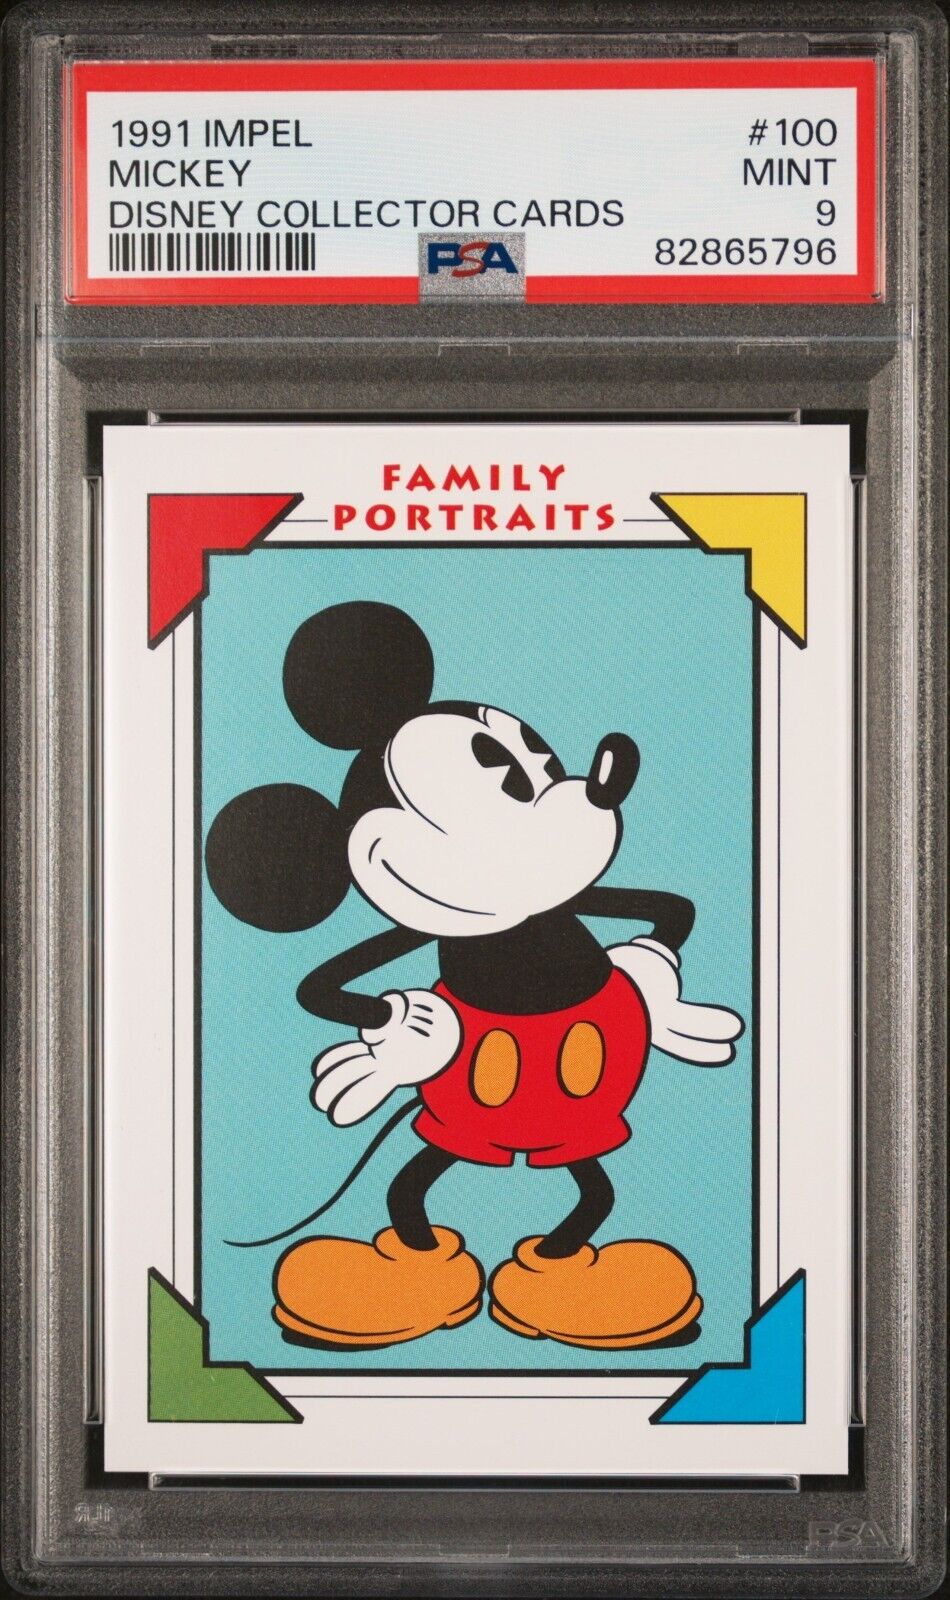 1991 Impel Disney Collector Cards Mickey Mouse PSA 9 MINT #100 Family Portraits